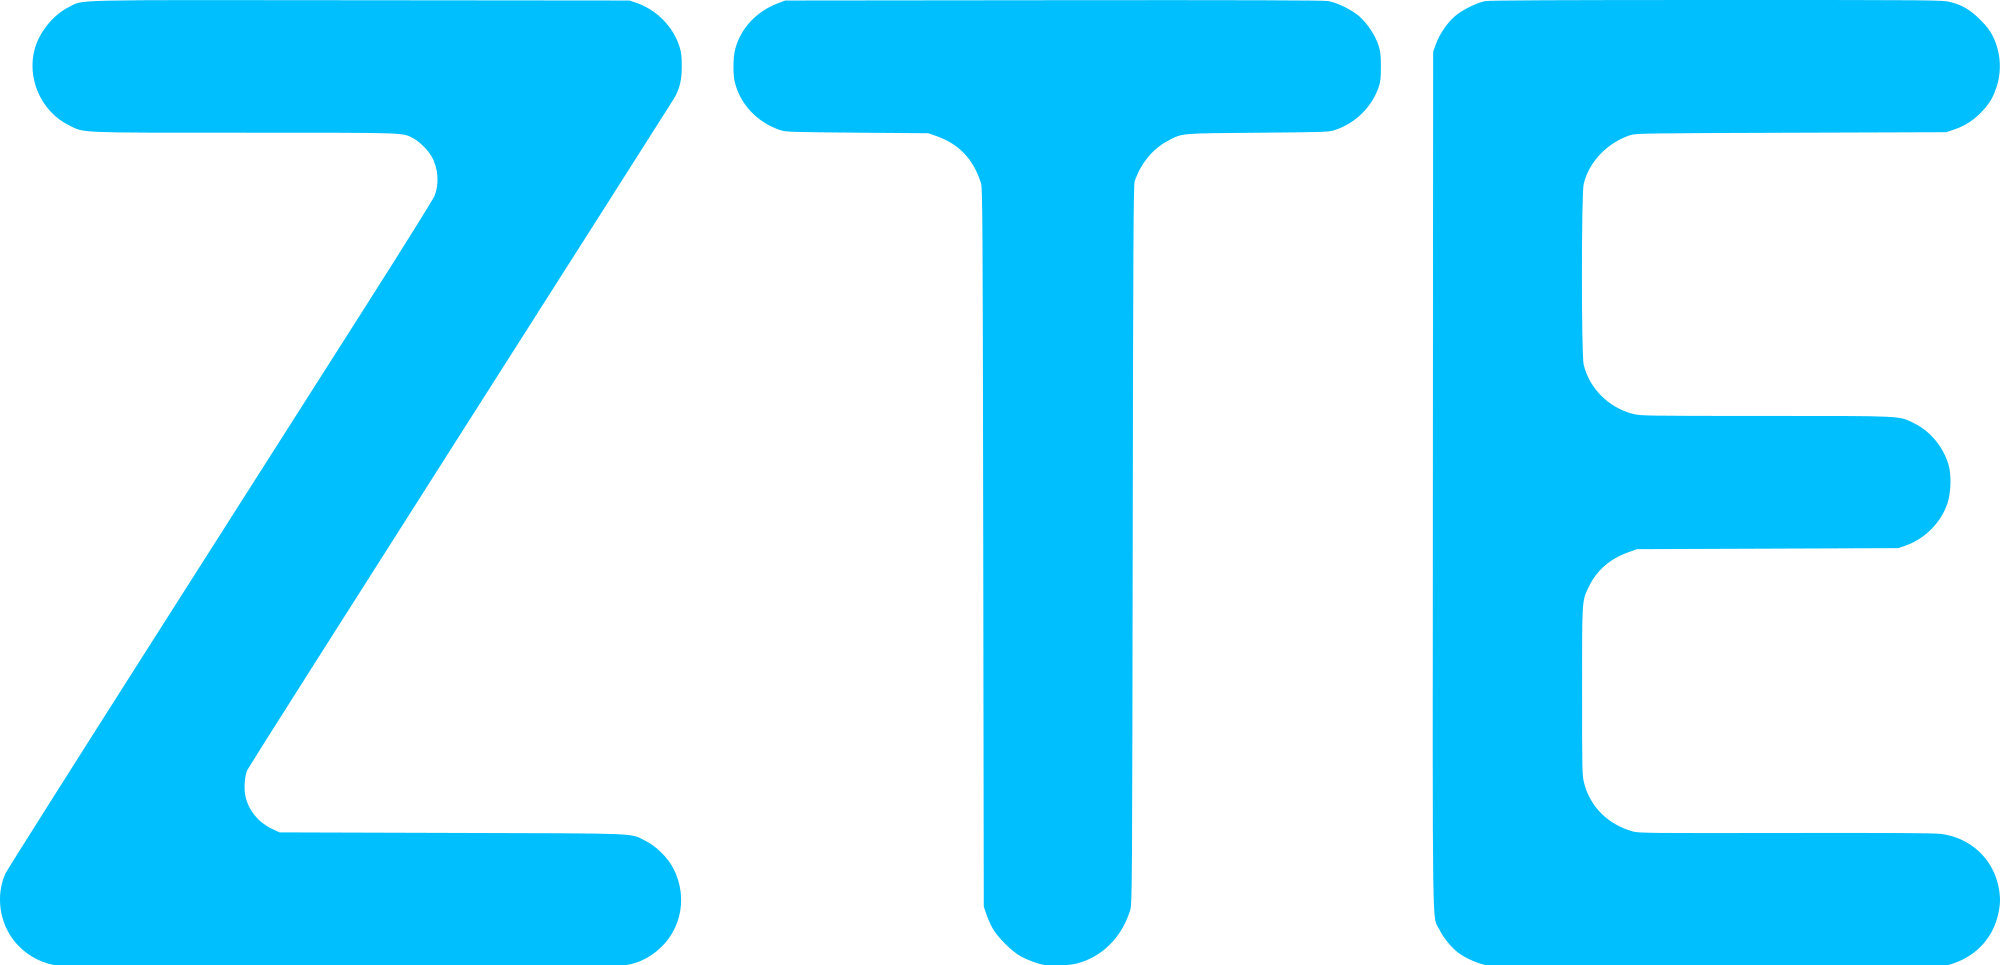 Open  , Zte Logo PNG - Free PNG